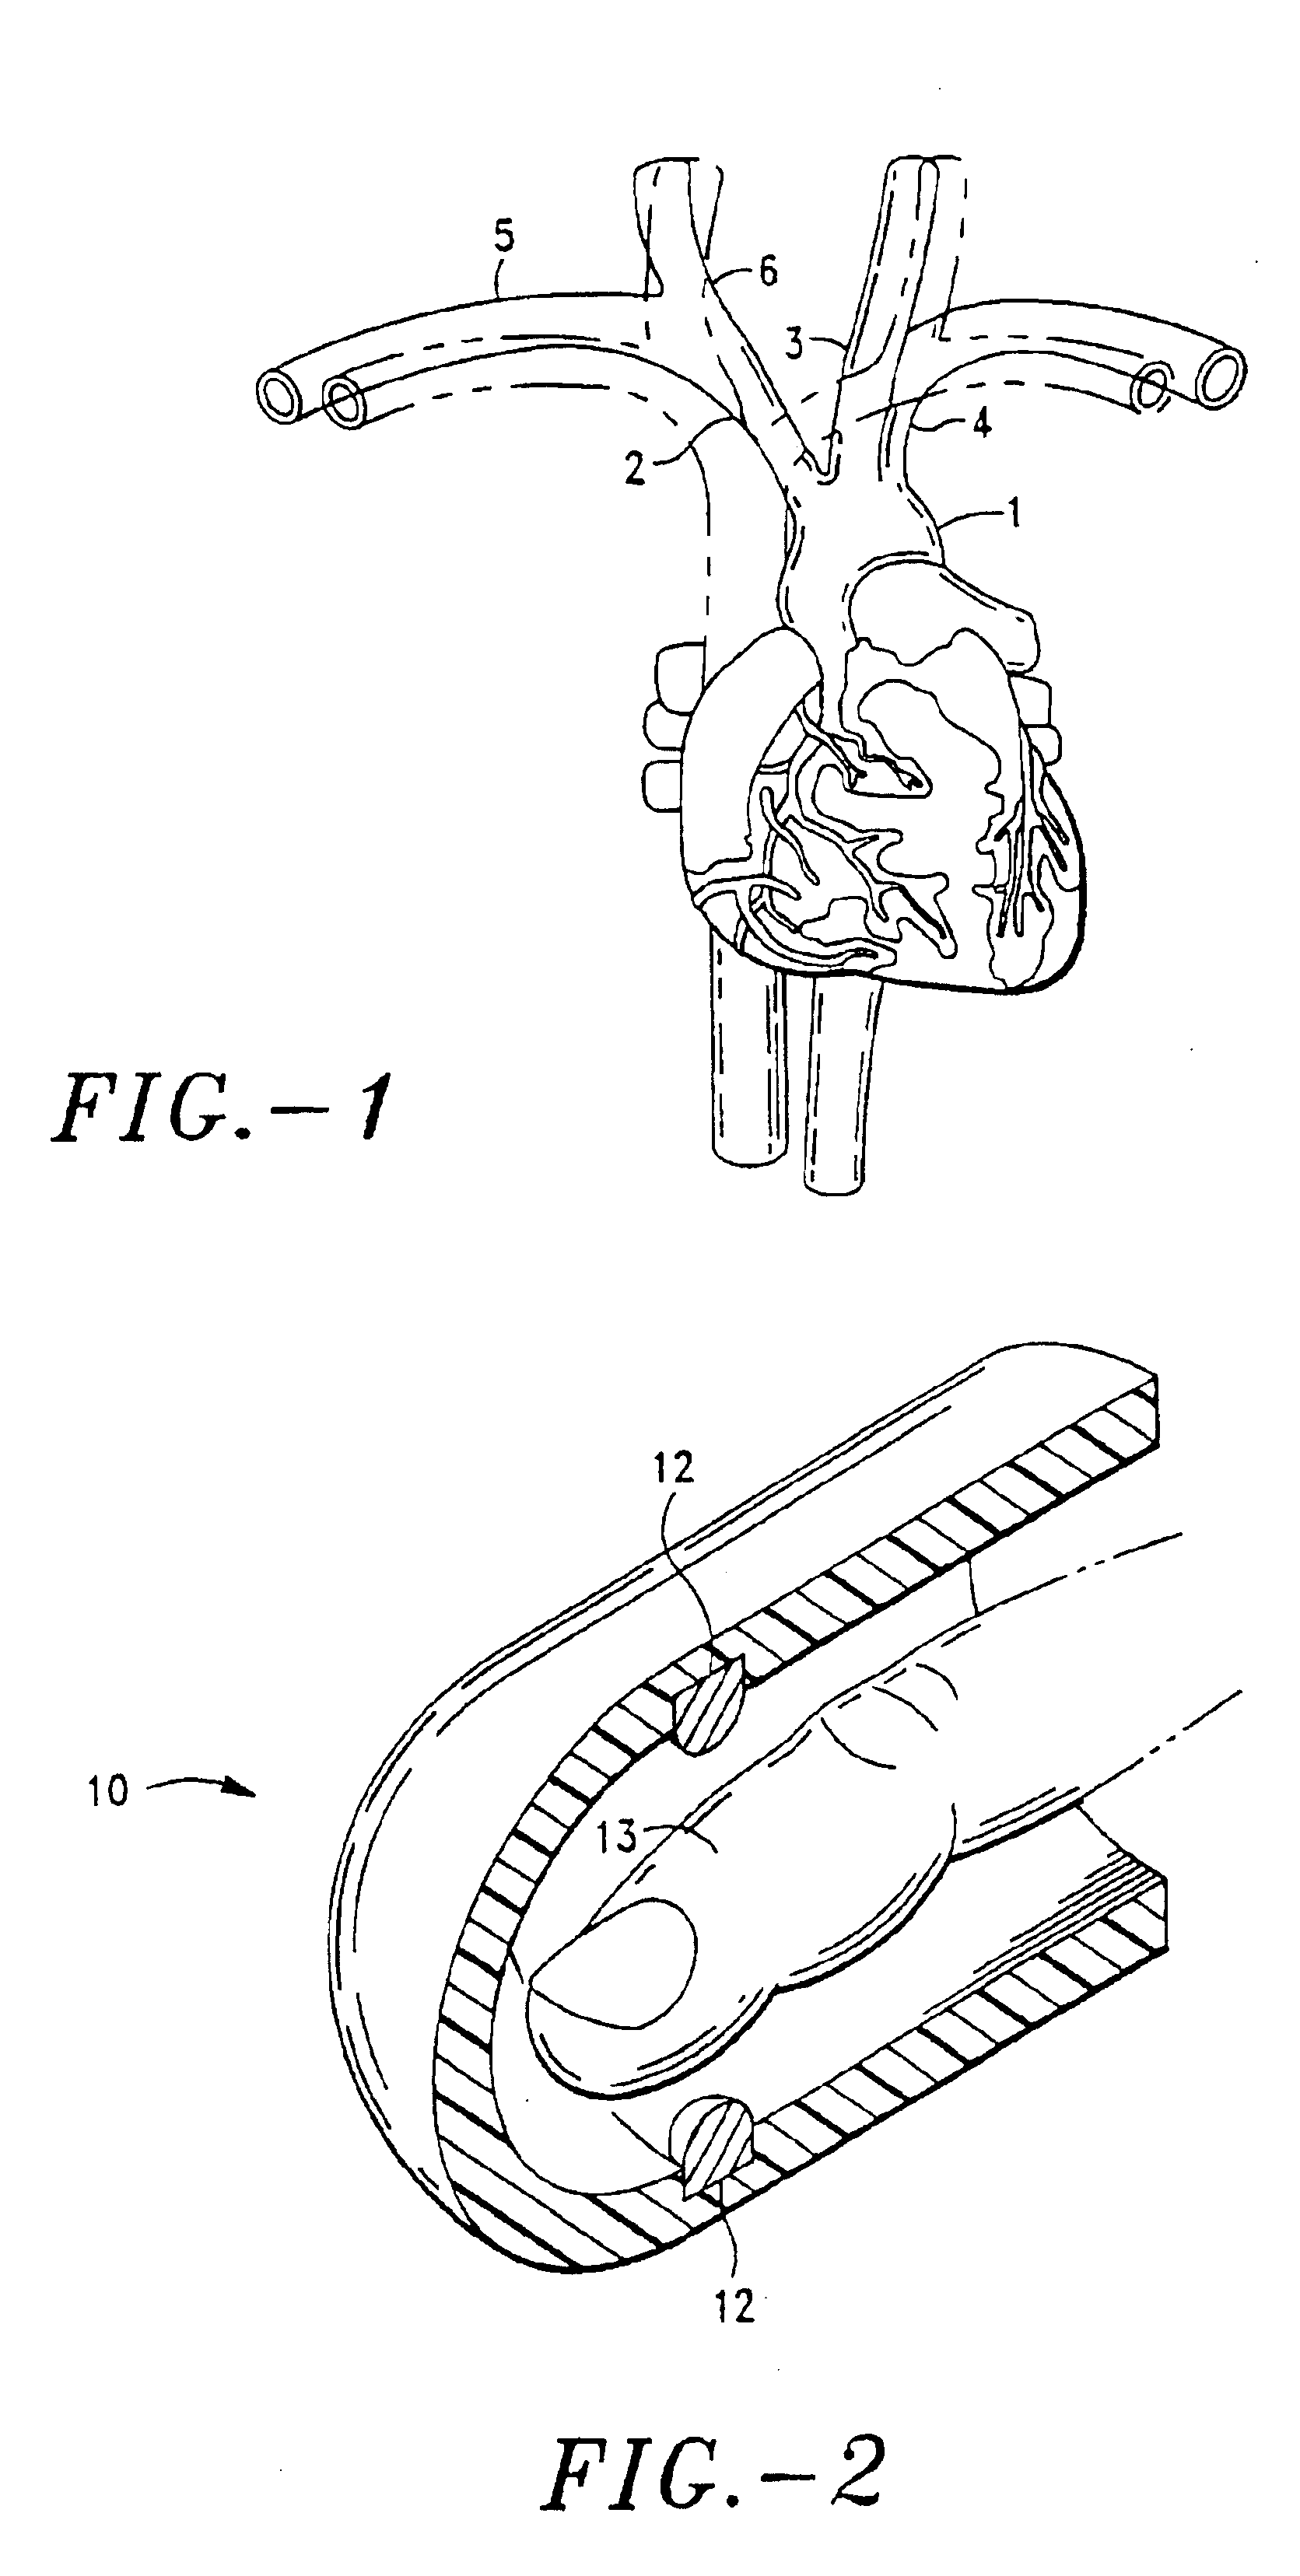 Device and method for noninvasive continuous determination of physiologic characteristics